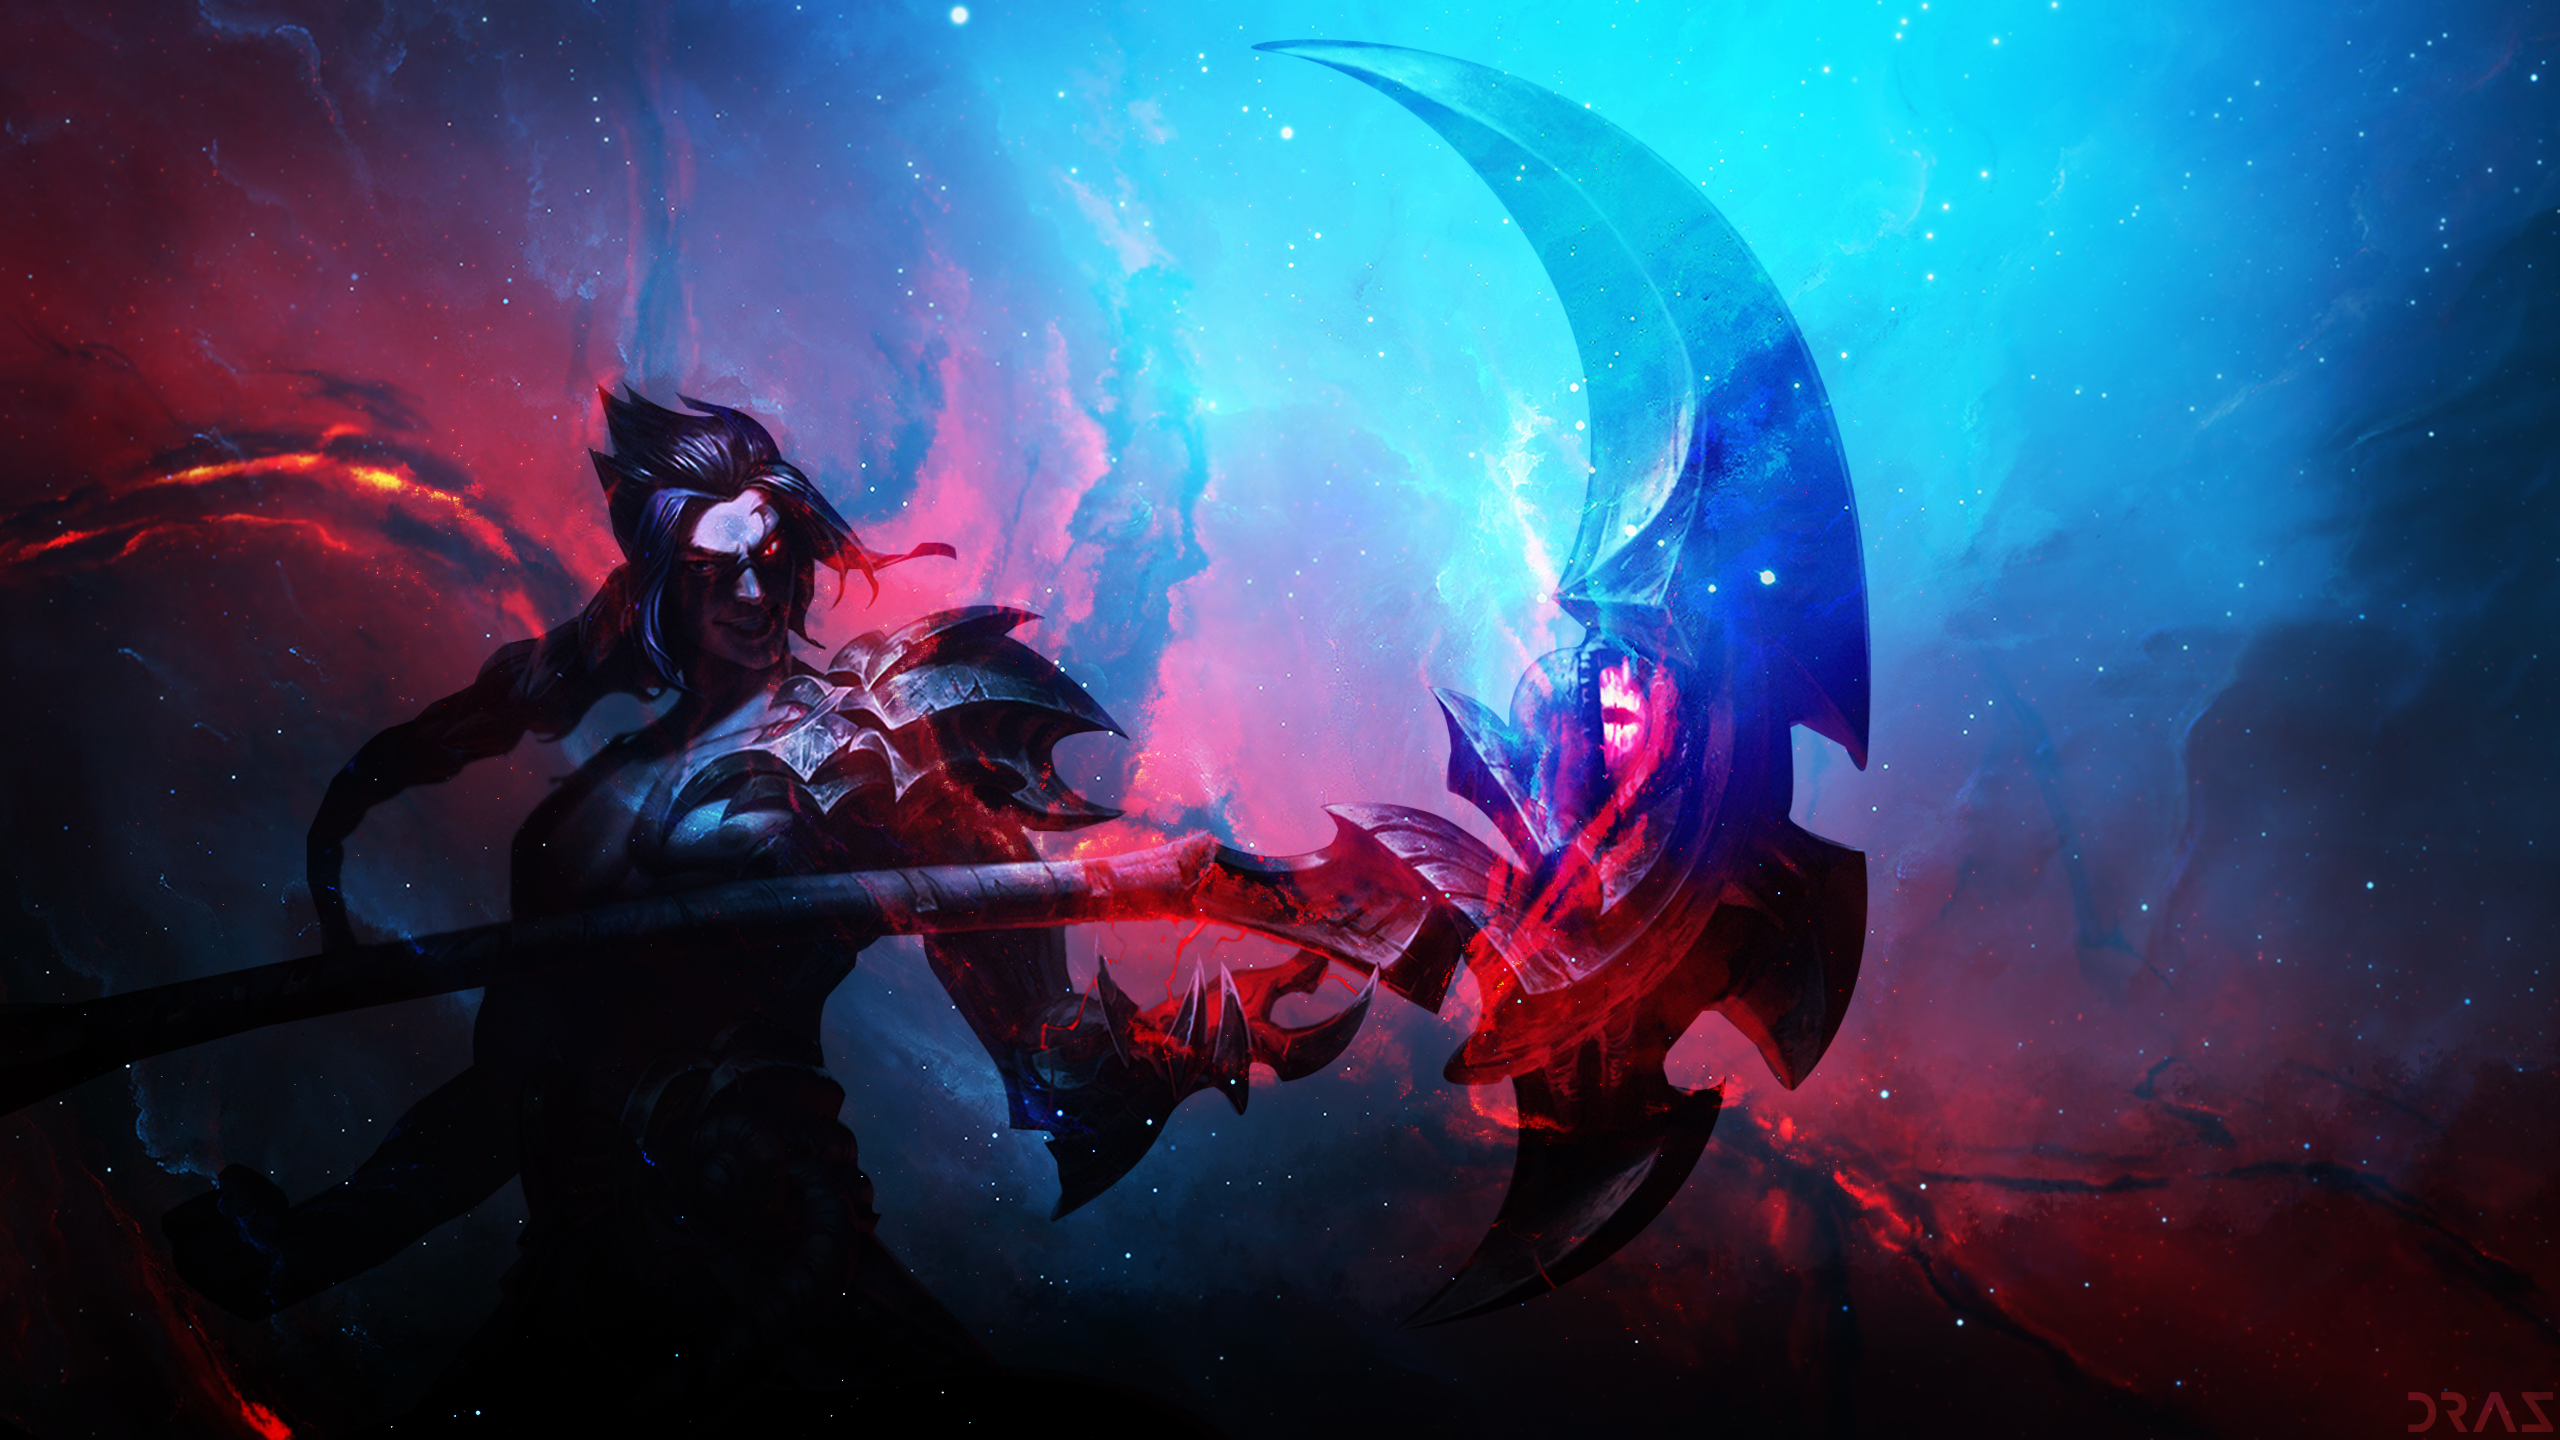 General 2560x1440 Summoner's Rift League of Legends video games video game characters fictional character cyan red Kayn (League of Legends)